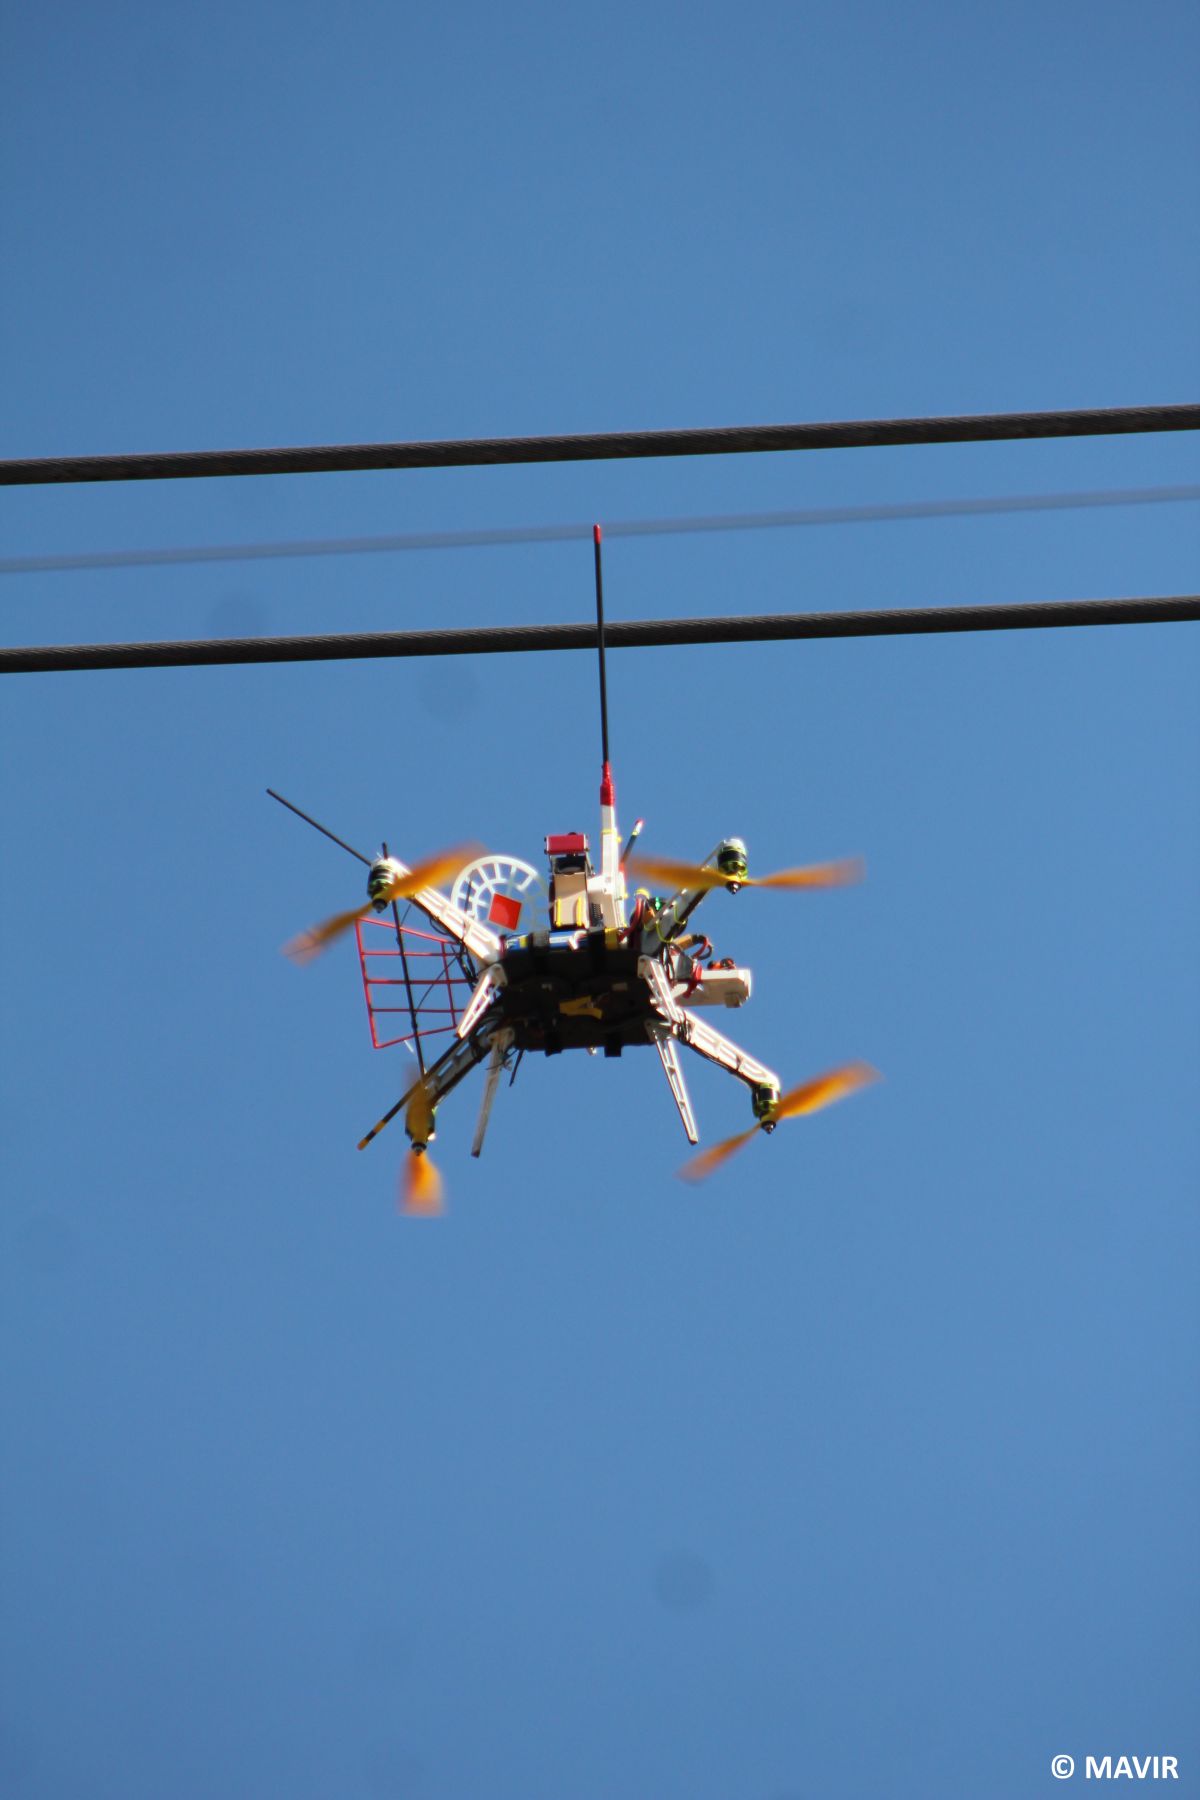 Drone installing the flight diverters on the power lines